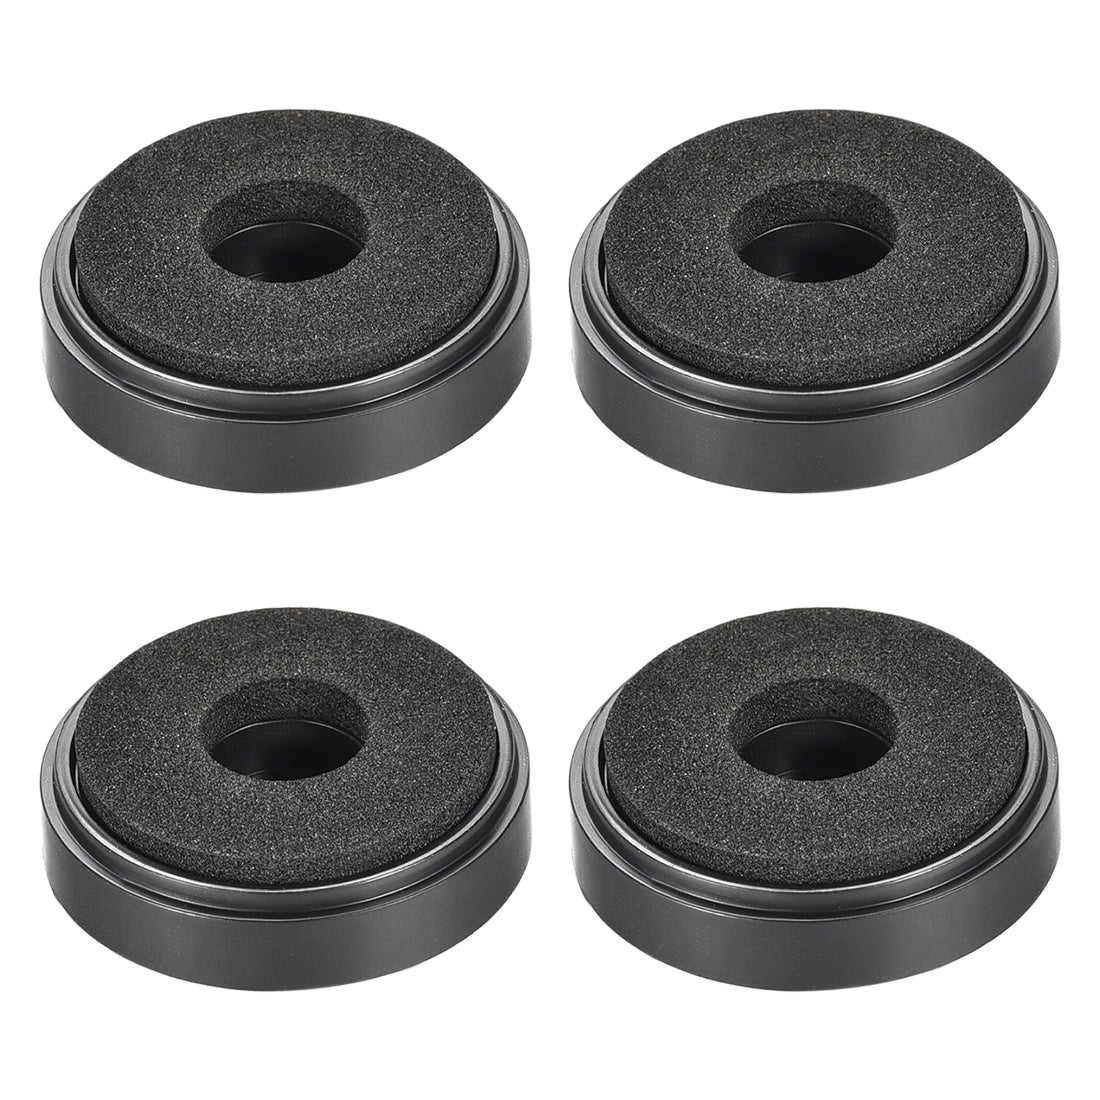 uxcell Uxcell 4 Pcs D30xH8mm Plastic Feet Anti-Vibration Base Pad Stand for Speaker Guitar Amplifier HiFi Black